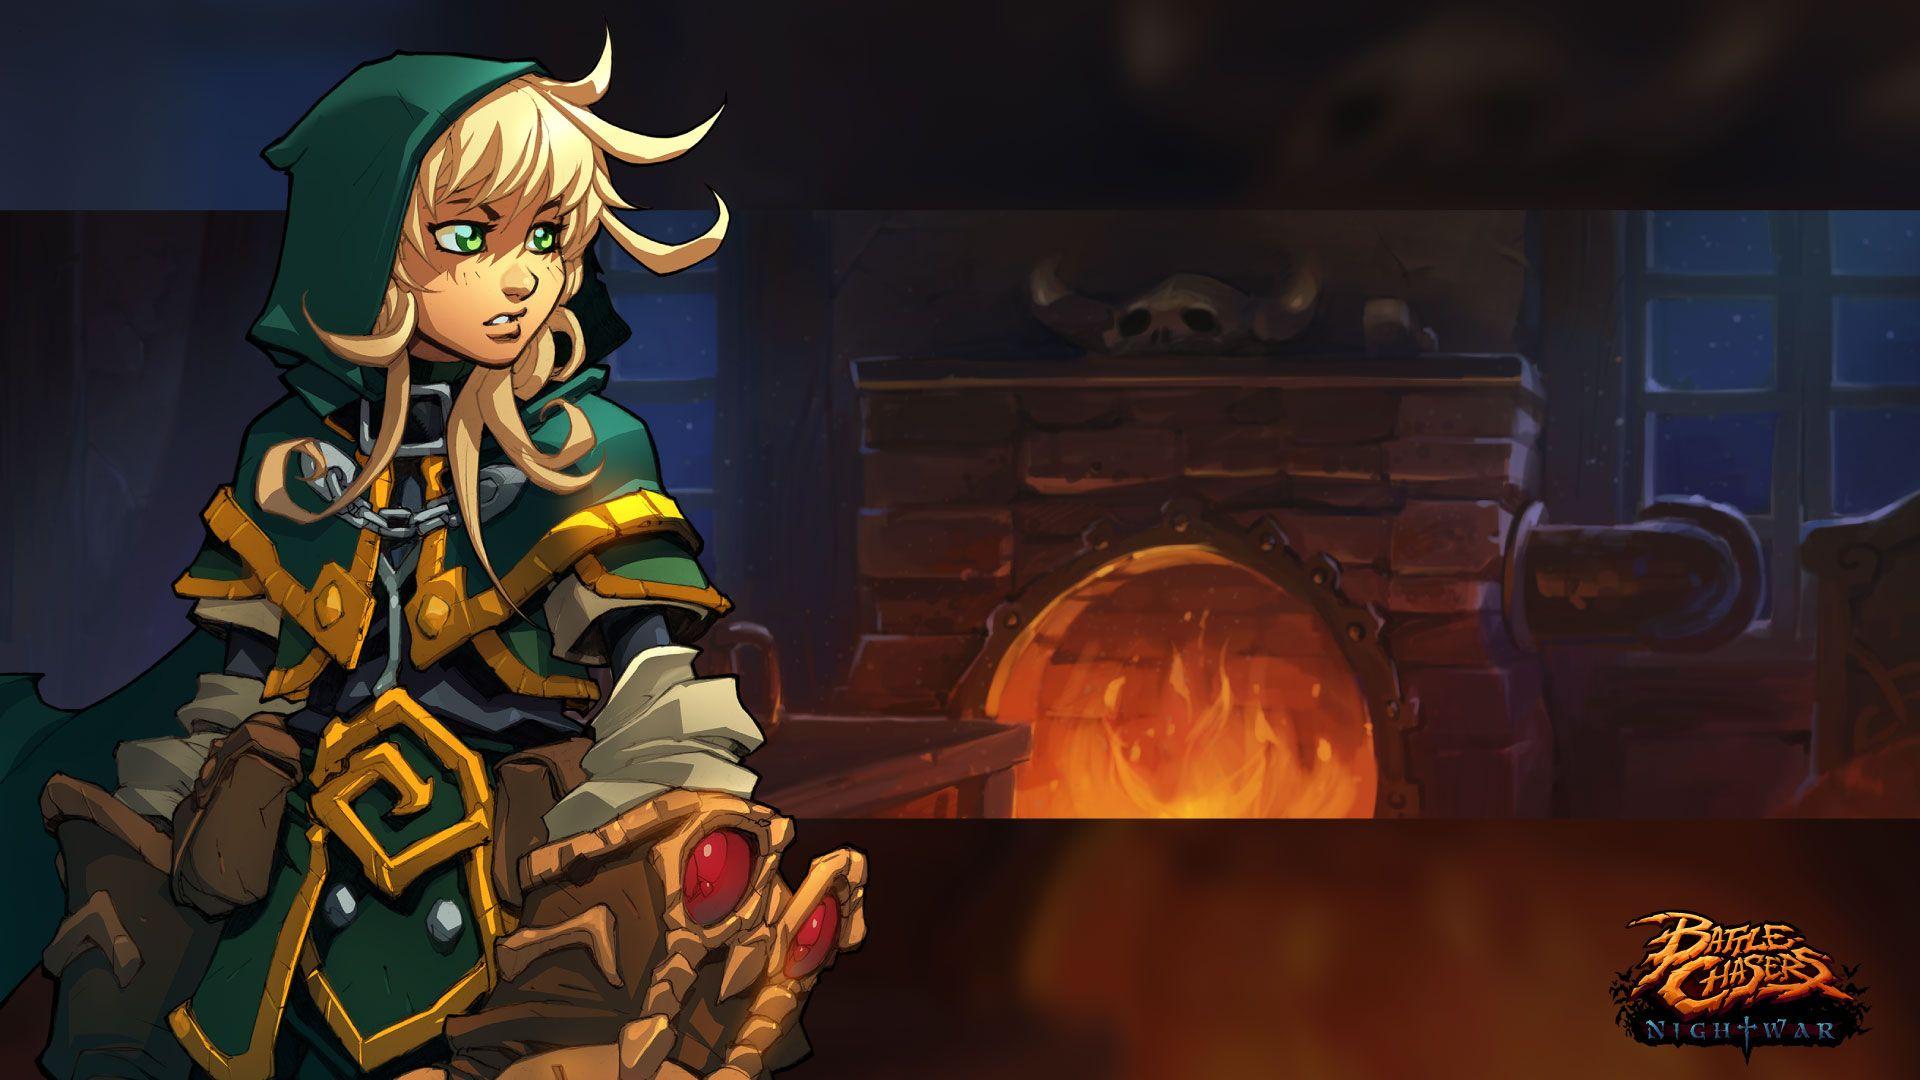 The young defener, Gully. Wallpaper from Battle Chasers: Nightwar